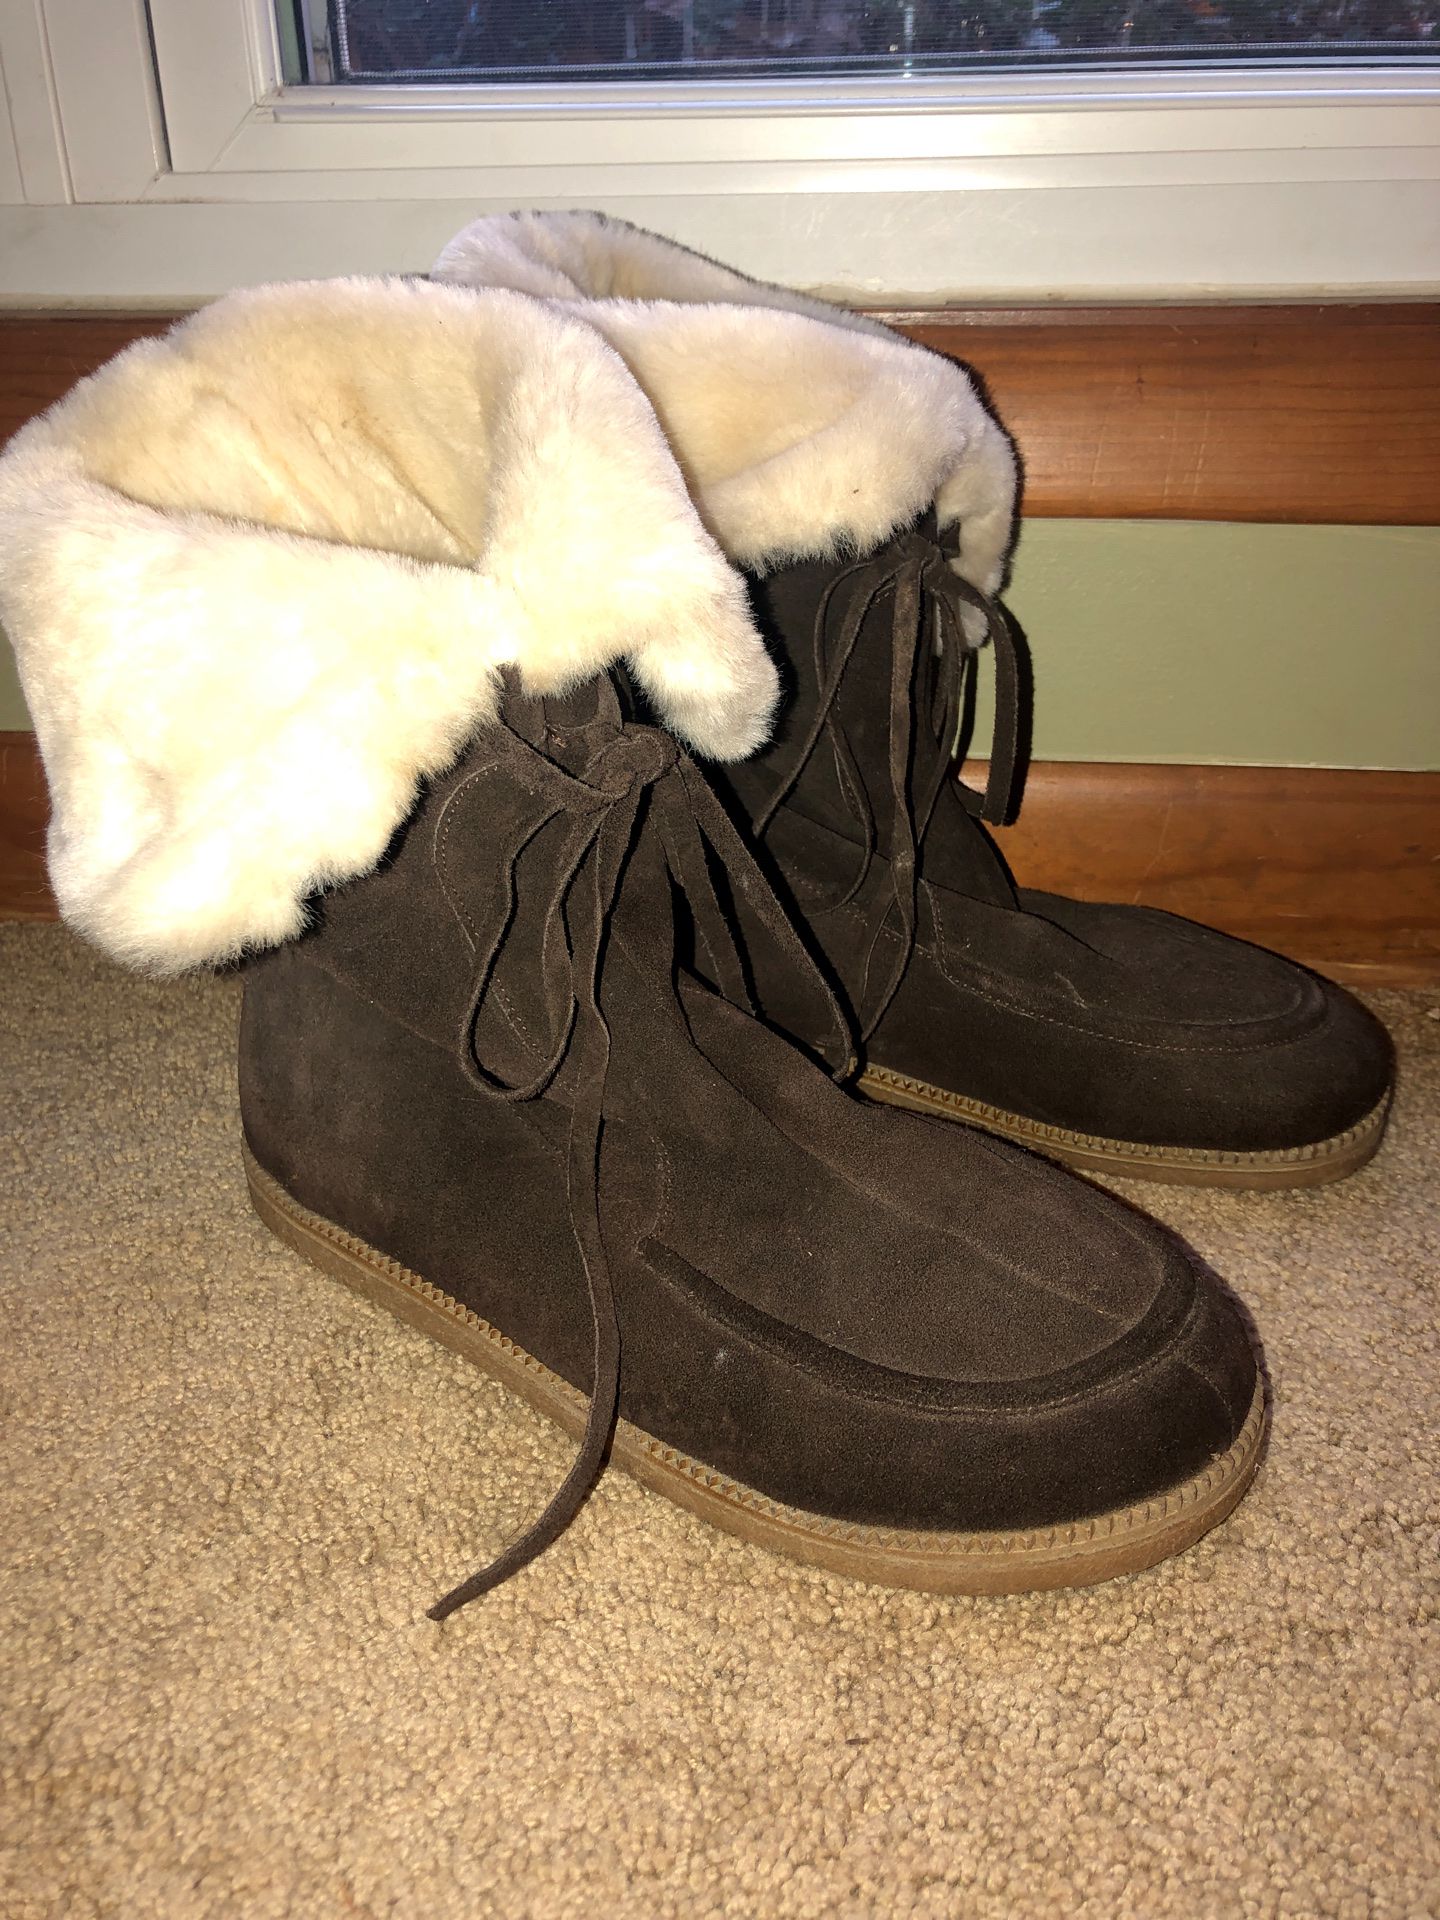 Michael KORS fuzzy suede leather boots size 10